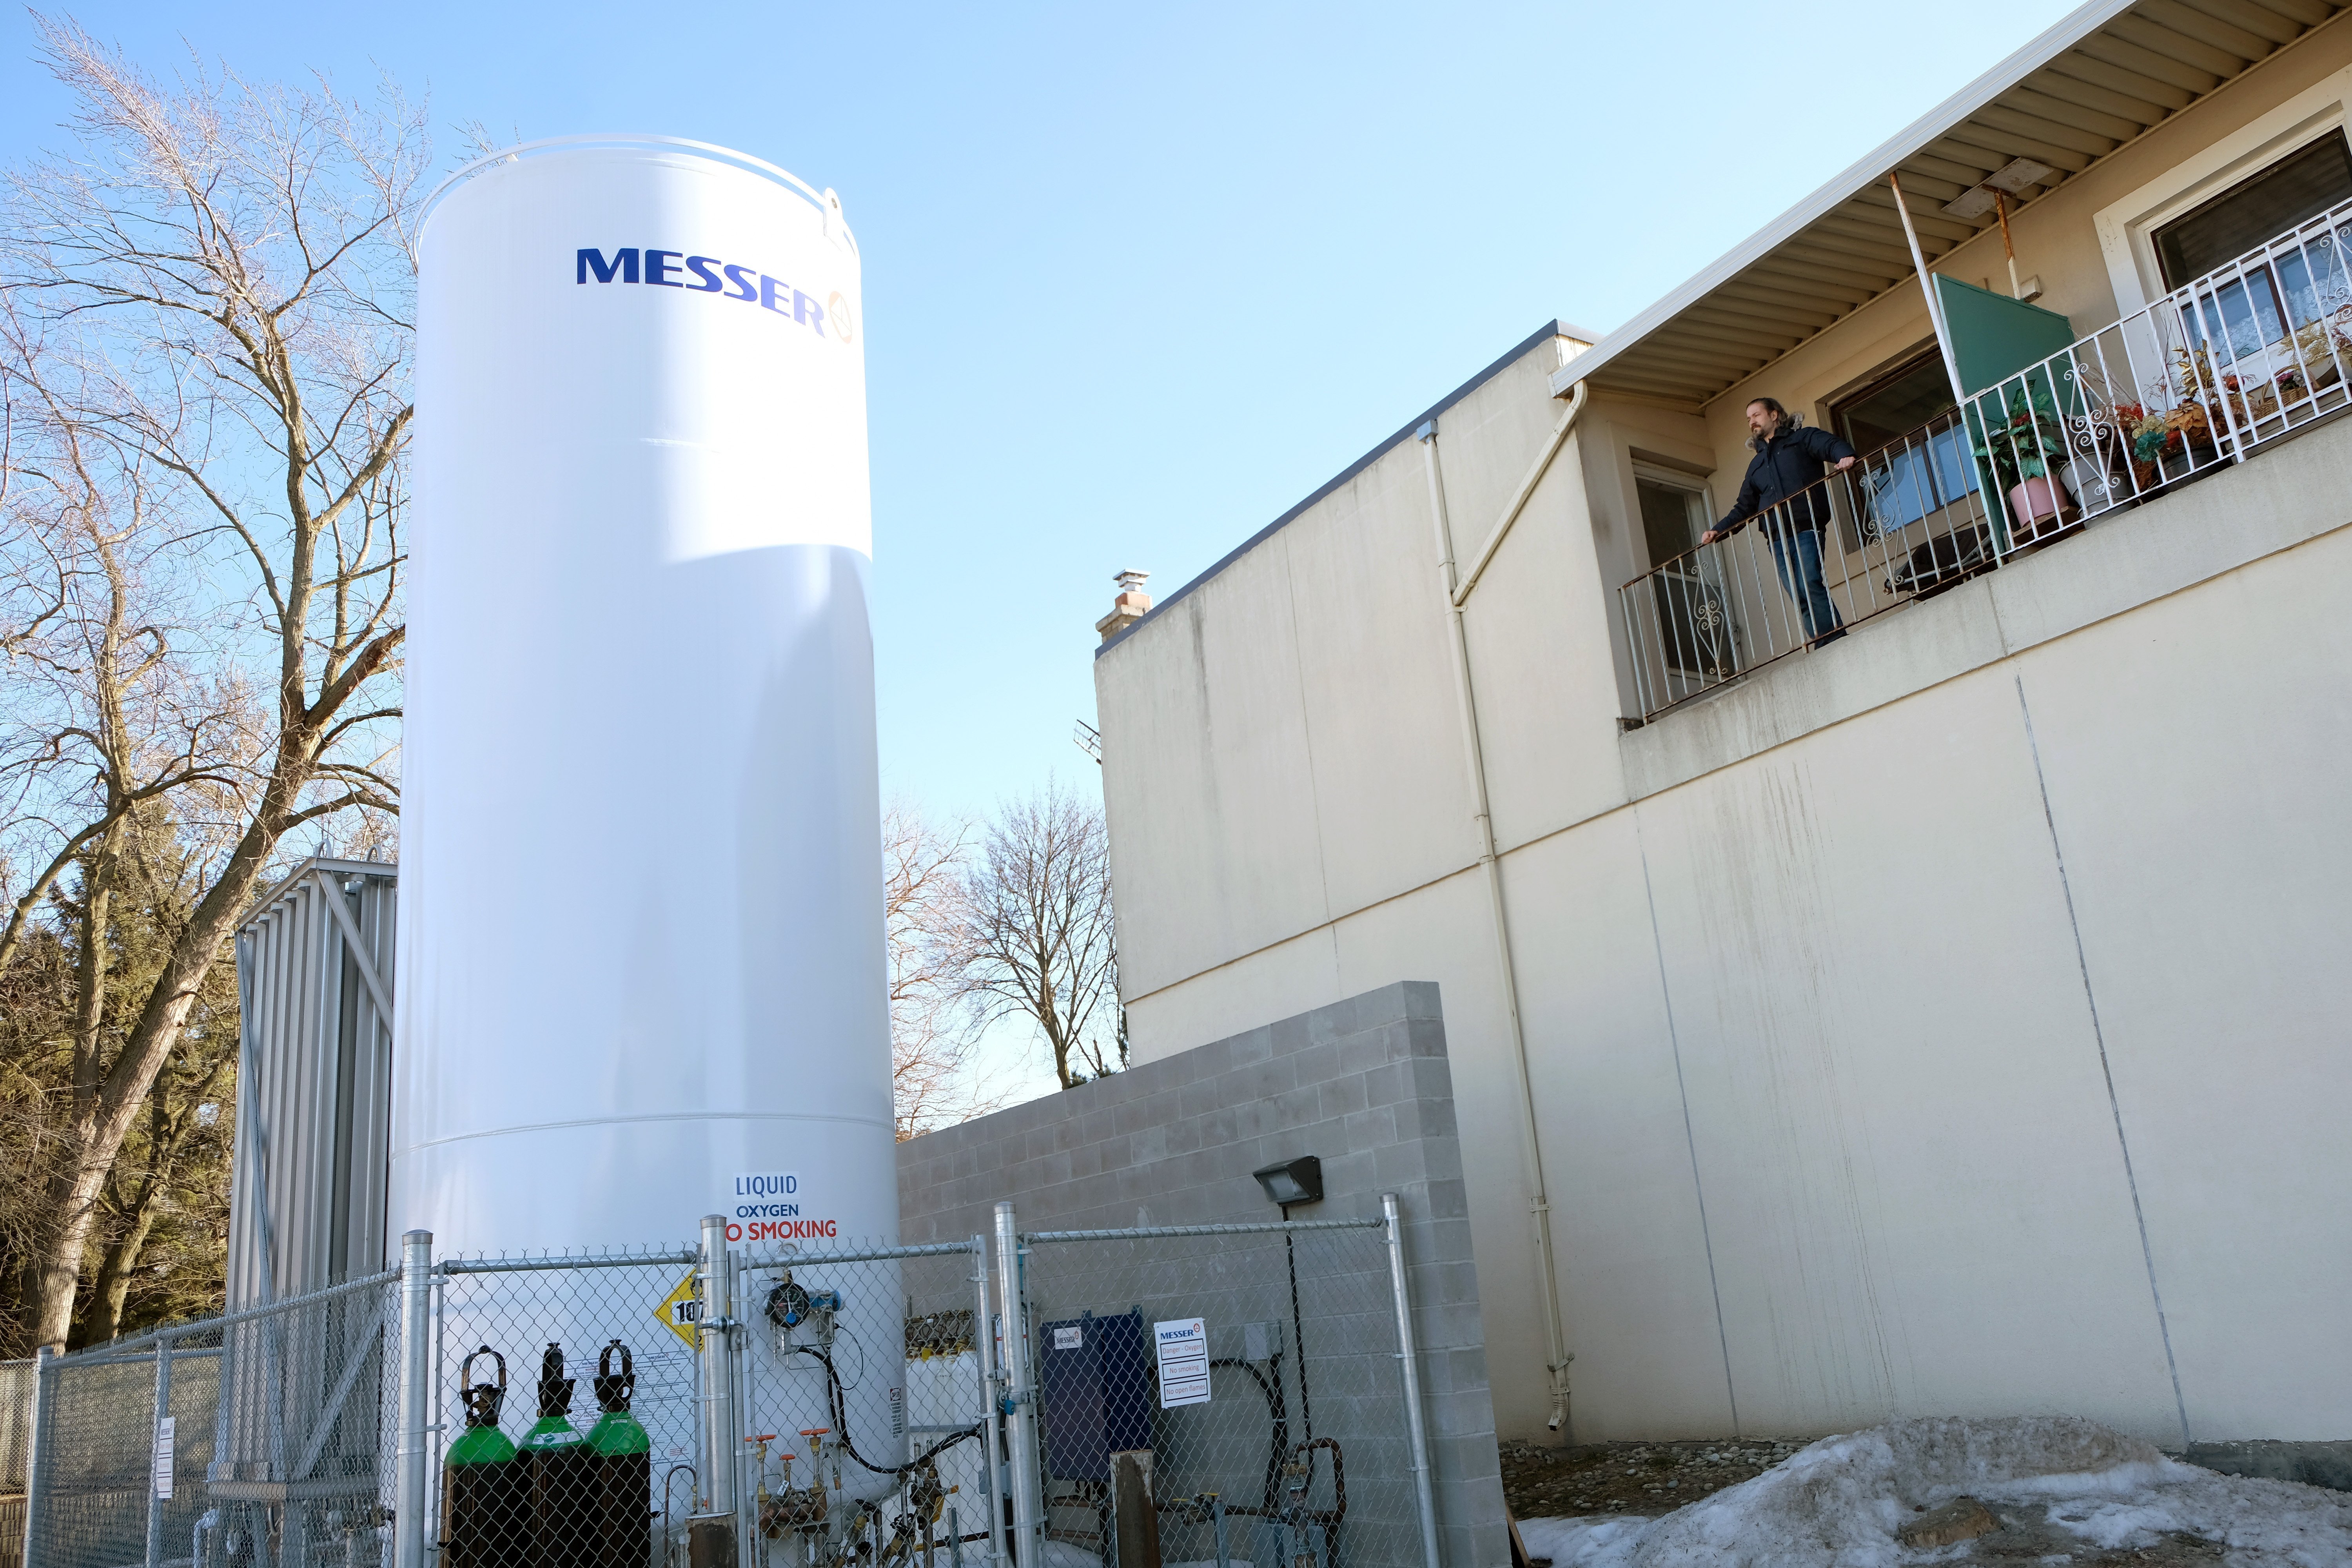 ‘I need it long past’: Mississauga citizens disenchanted over huge liquid oxygen tank town says doesn’t violate bylaws